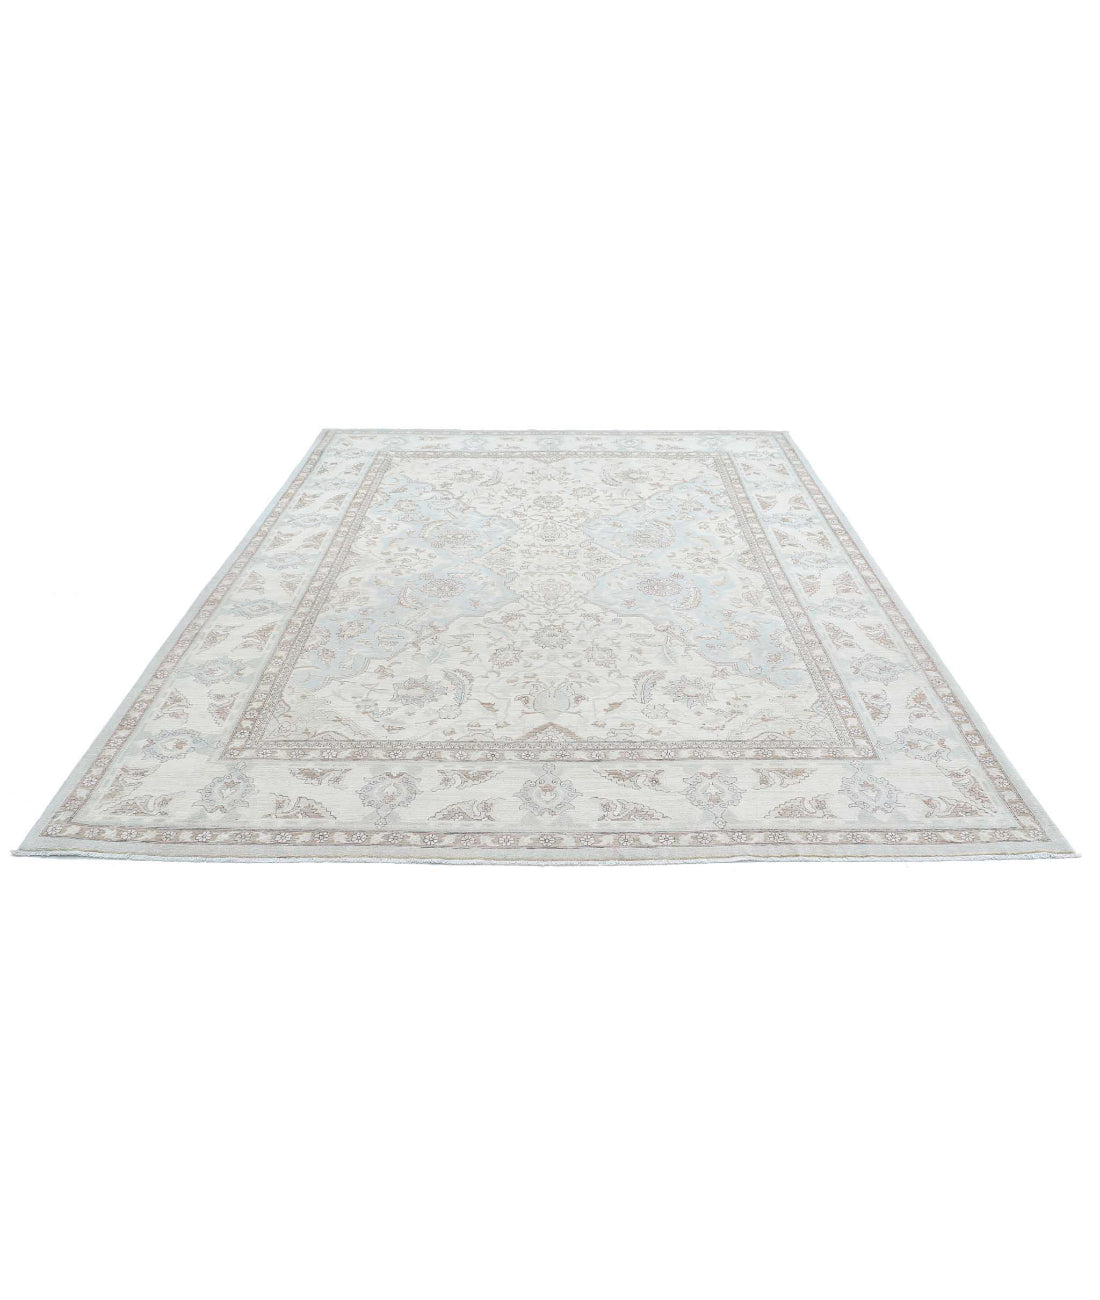 Hand Knotted Fine Ariana Polonaise Wool Rug - 7'11'' x 10'2'' 7'11'' x 10'2'' (238 X 305) / Ivory / Taupe